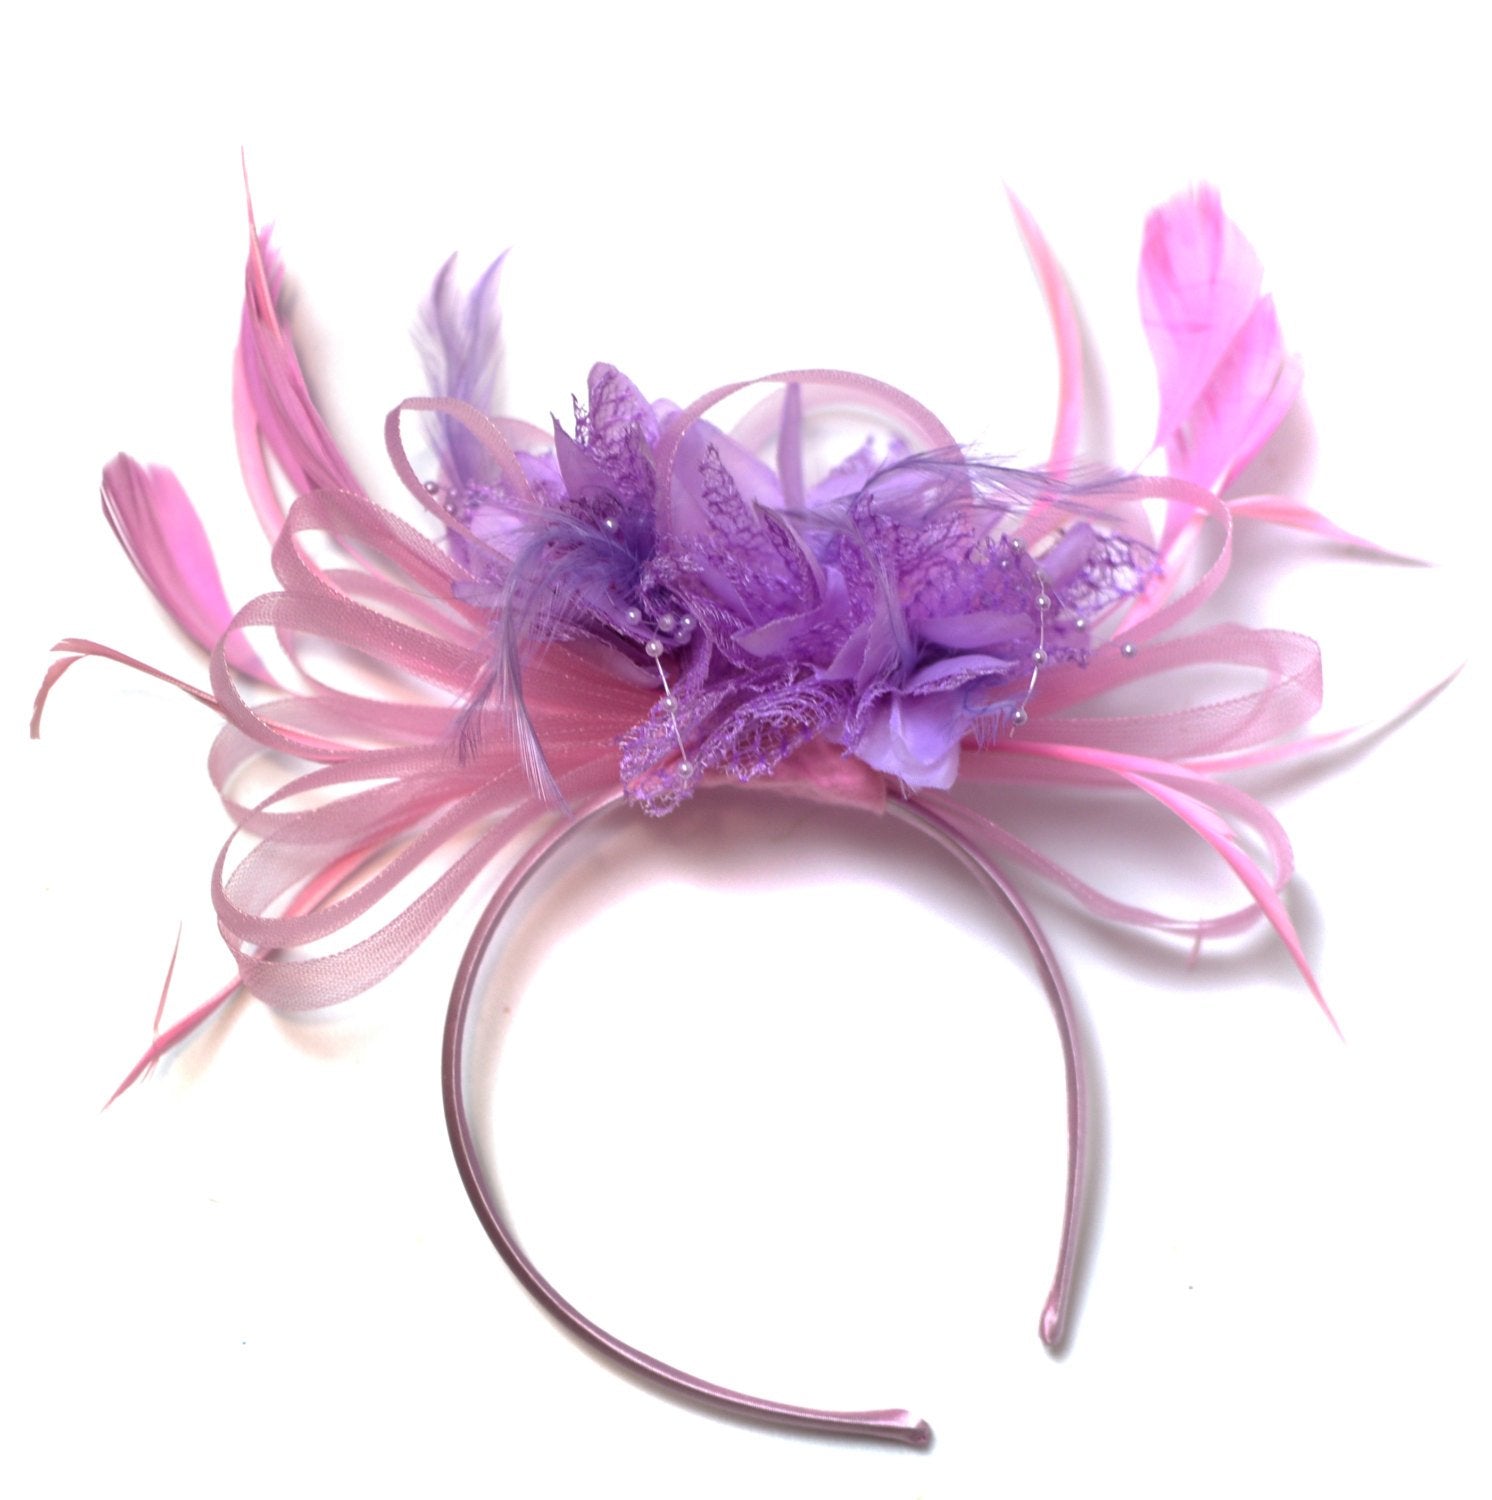 Caprilite Baby Pink and Lilac Purple Fascinator on Headband Alice Band UK Wedding Ascot Races Derby